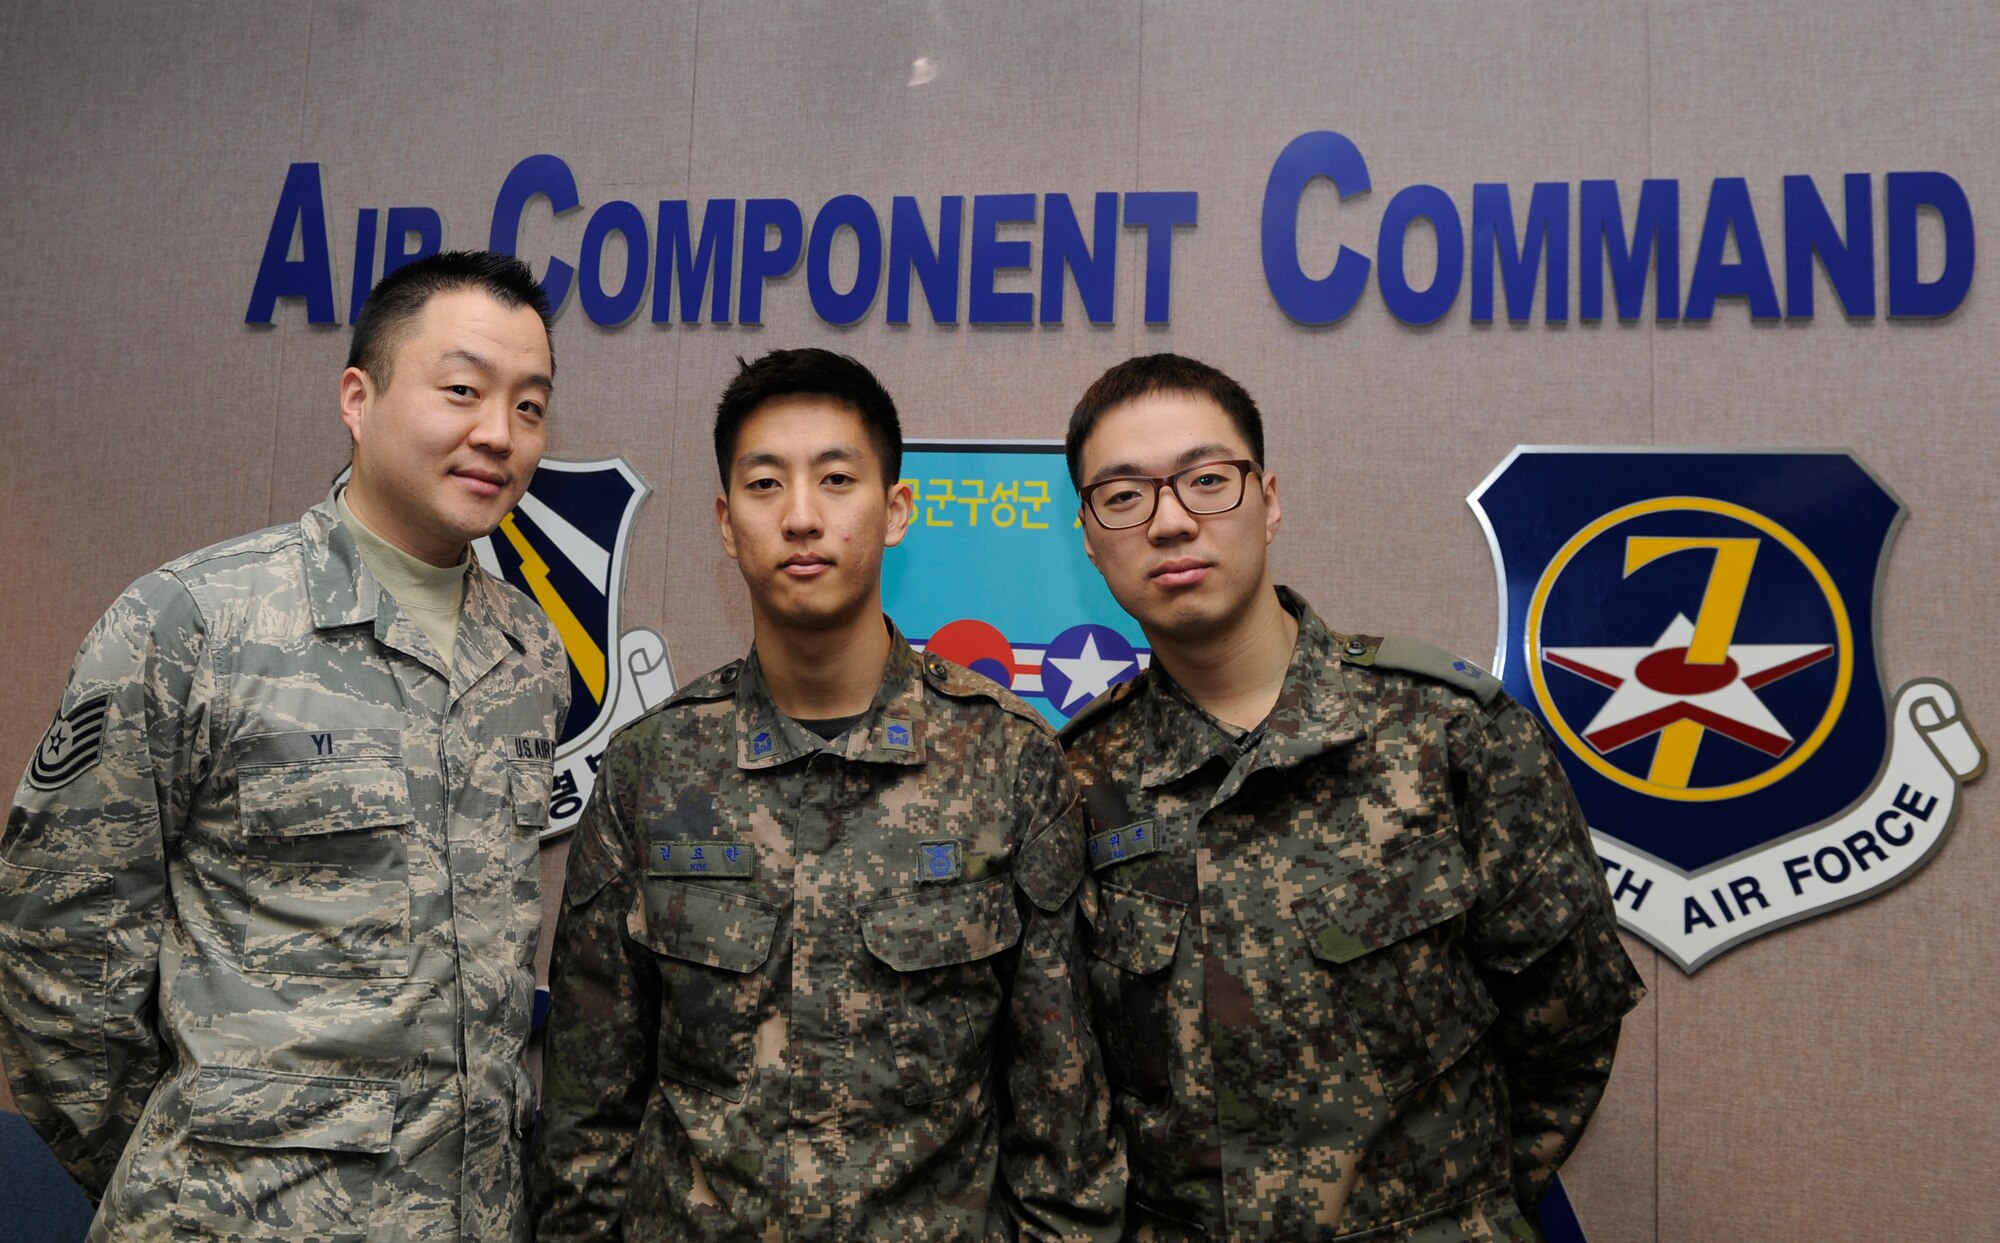 U.S. Air Force Tech Sgt. Isaac Yi and Republic of Korea Air Force 2nd Lts. Yohan Kim and Wero Jung with the 7th Air Force Air Component Command Plans and Coordination Division, serve as linguists during Exercise Key Resolve 2014 at Osan Air Base, Republic of Korea, March 6, 2014.  Linguists translate and transcribe key messages between the Republic of Korea and U.S. Air Force. (U.S. Air Force photo/Airman 1st Class Omari Bernard)